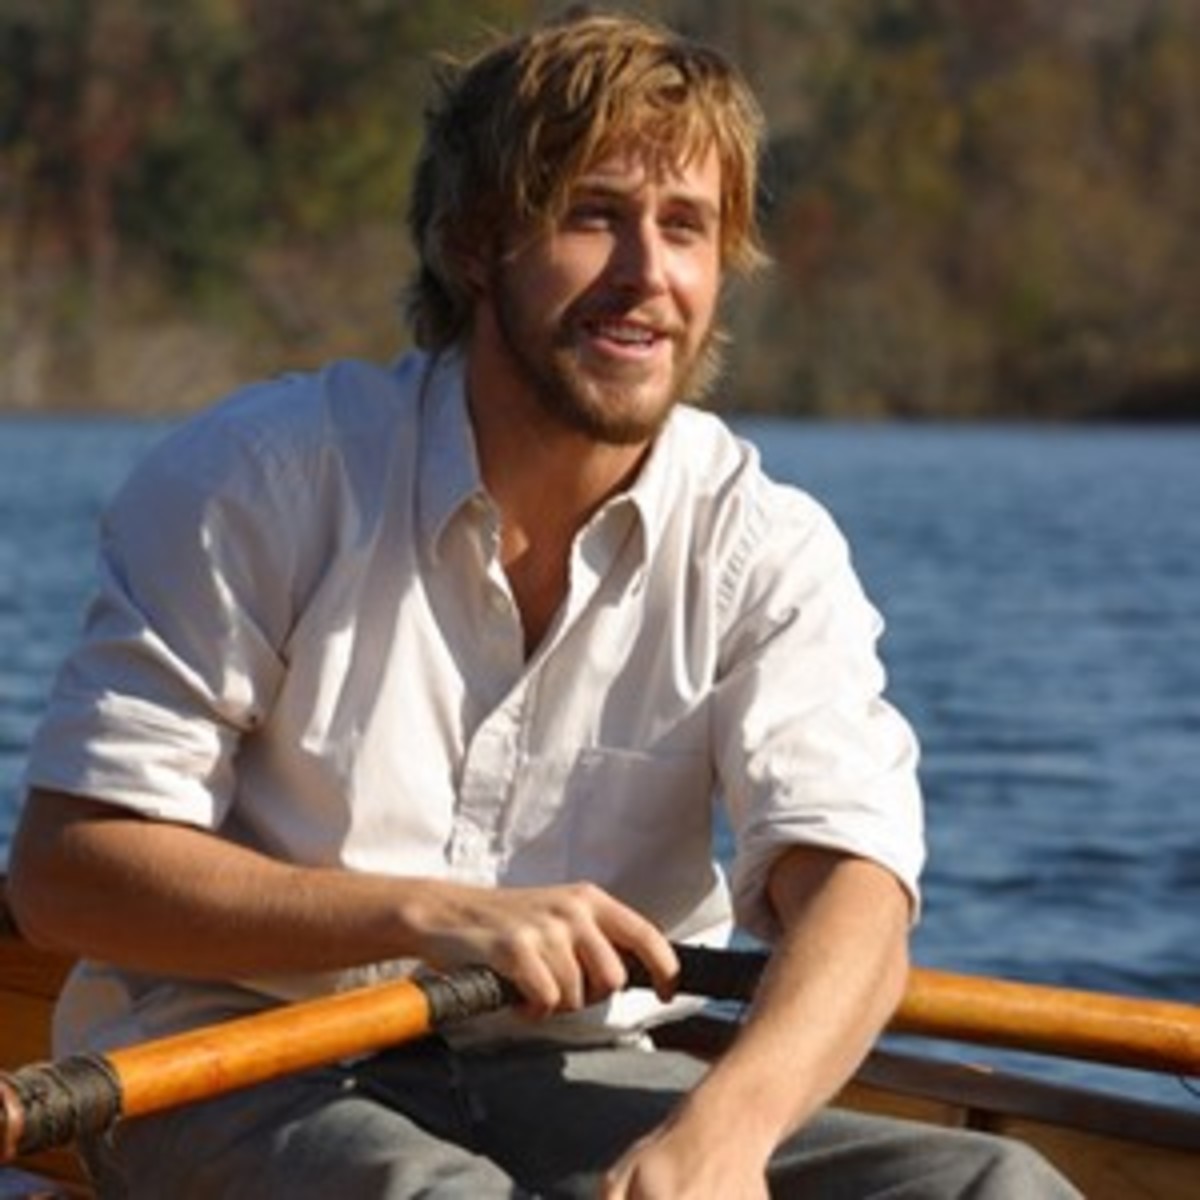 movie-review-of-the-notebook-the-movie-based-on-the-novel-by-nicholas-sparks